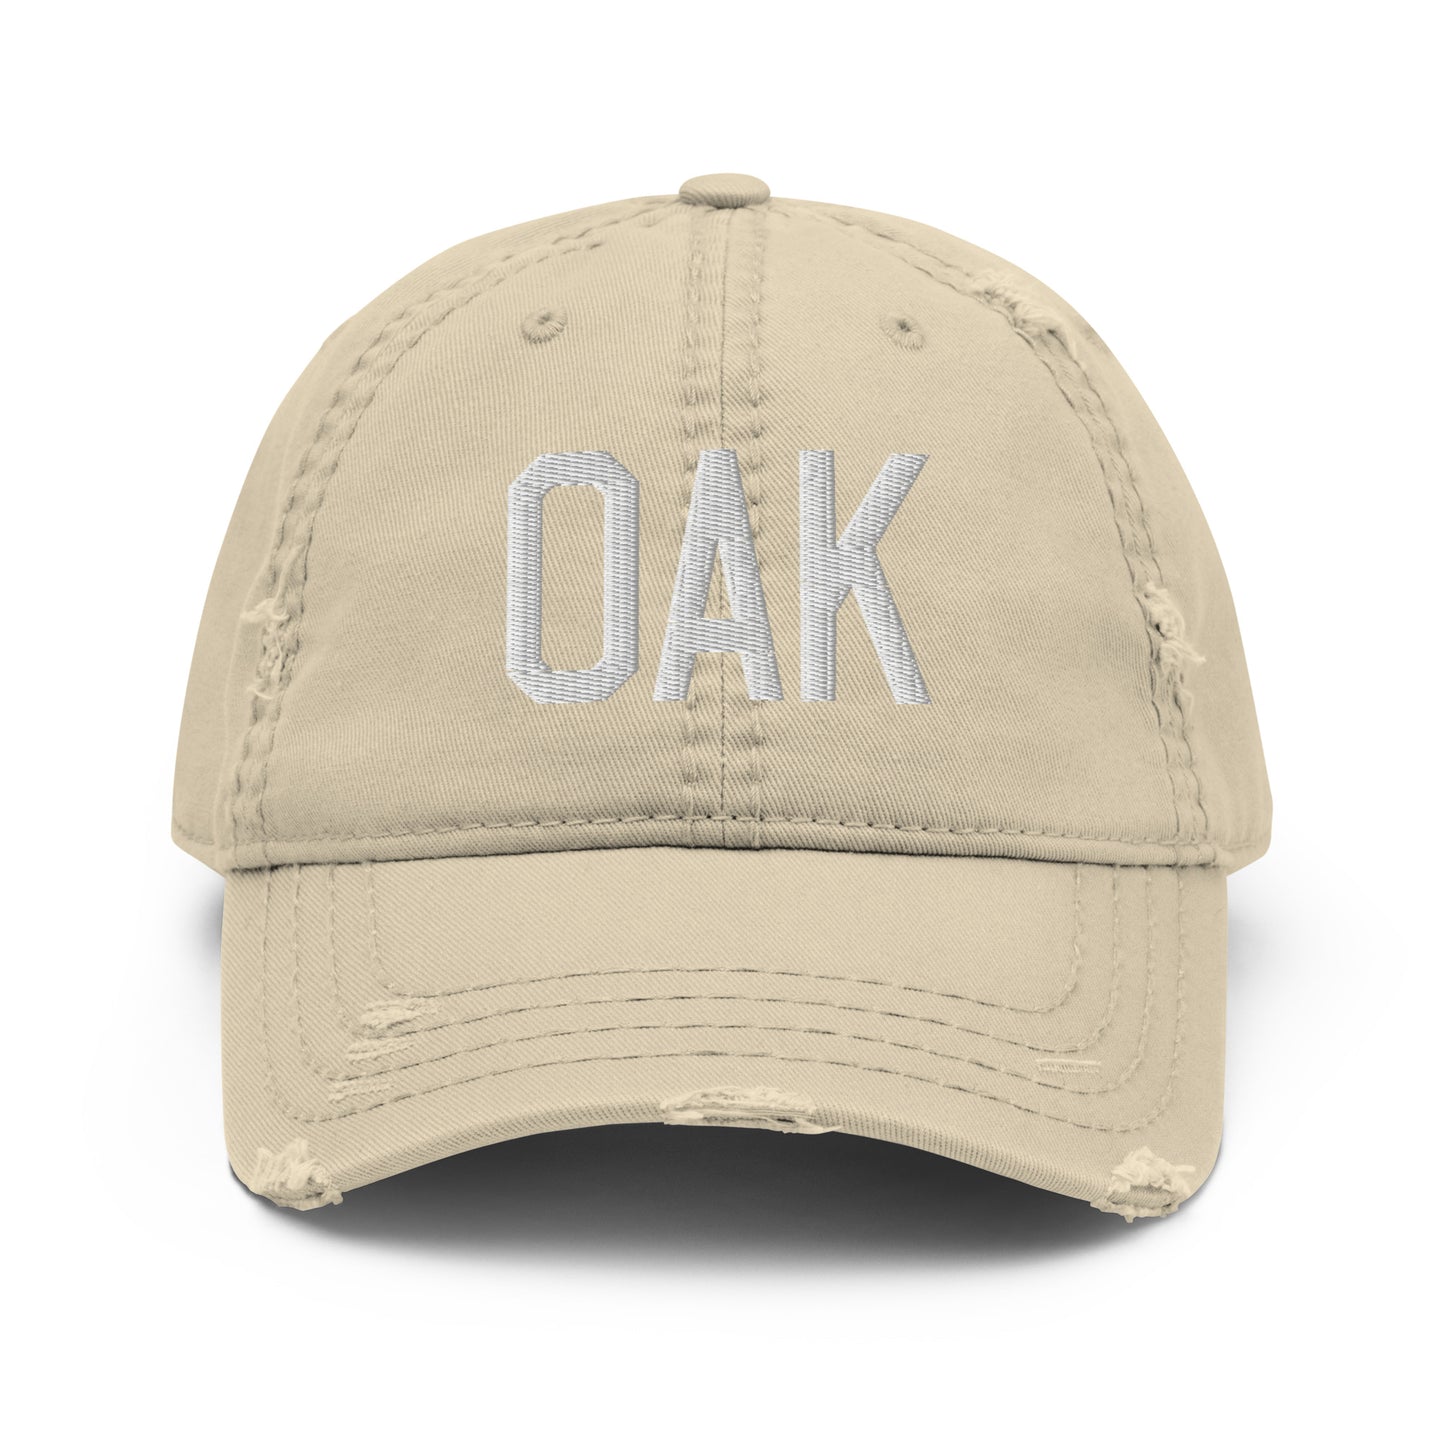 Airport Code Distressed Hat - White • OAK Oakland • YHM Designs - Image 18